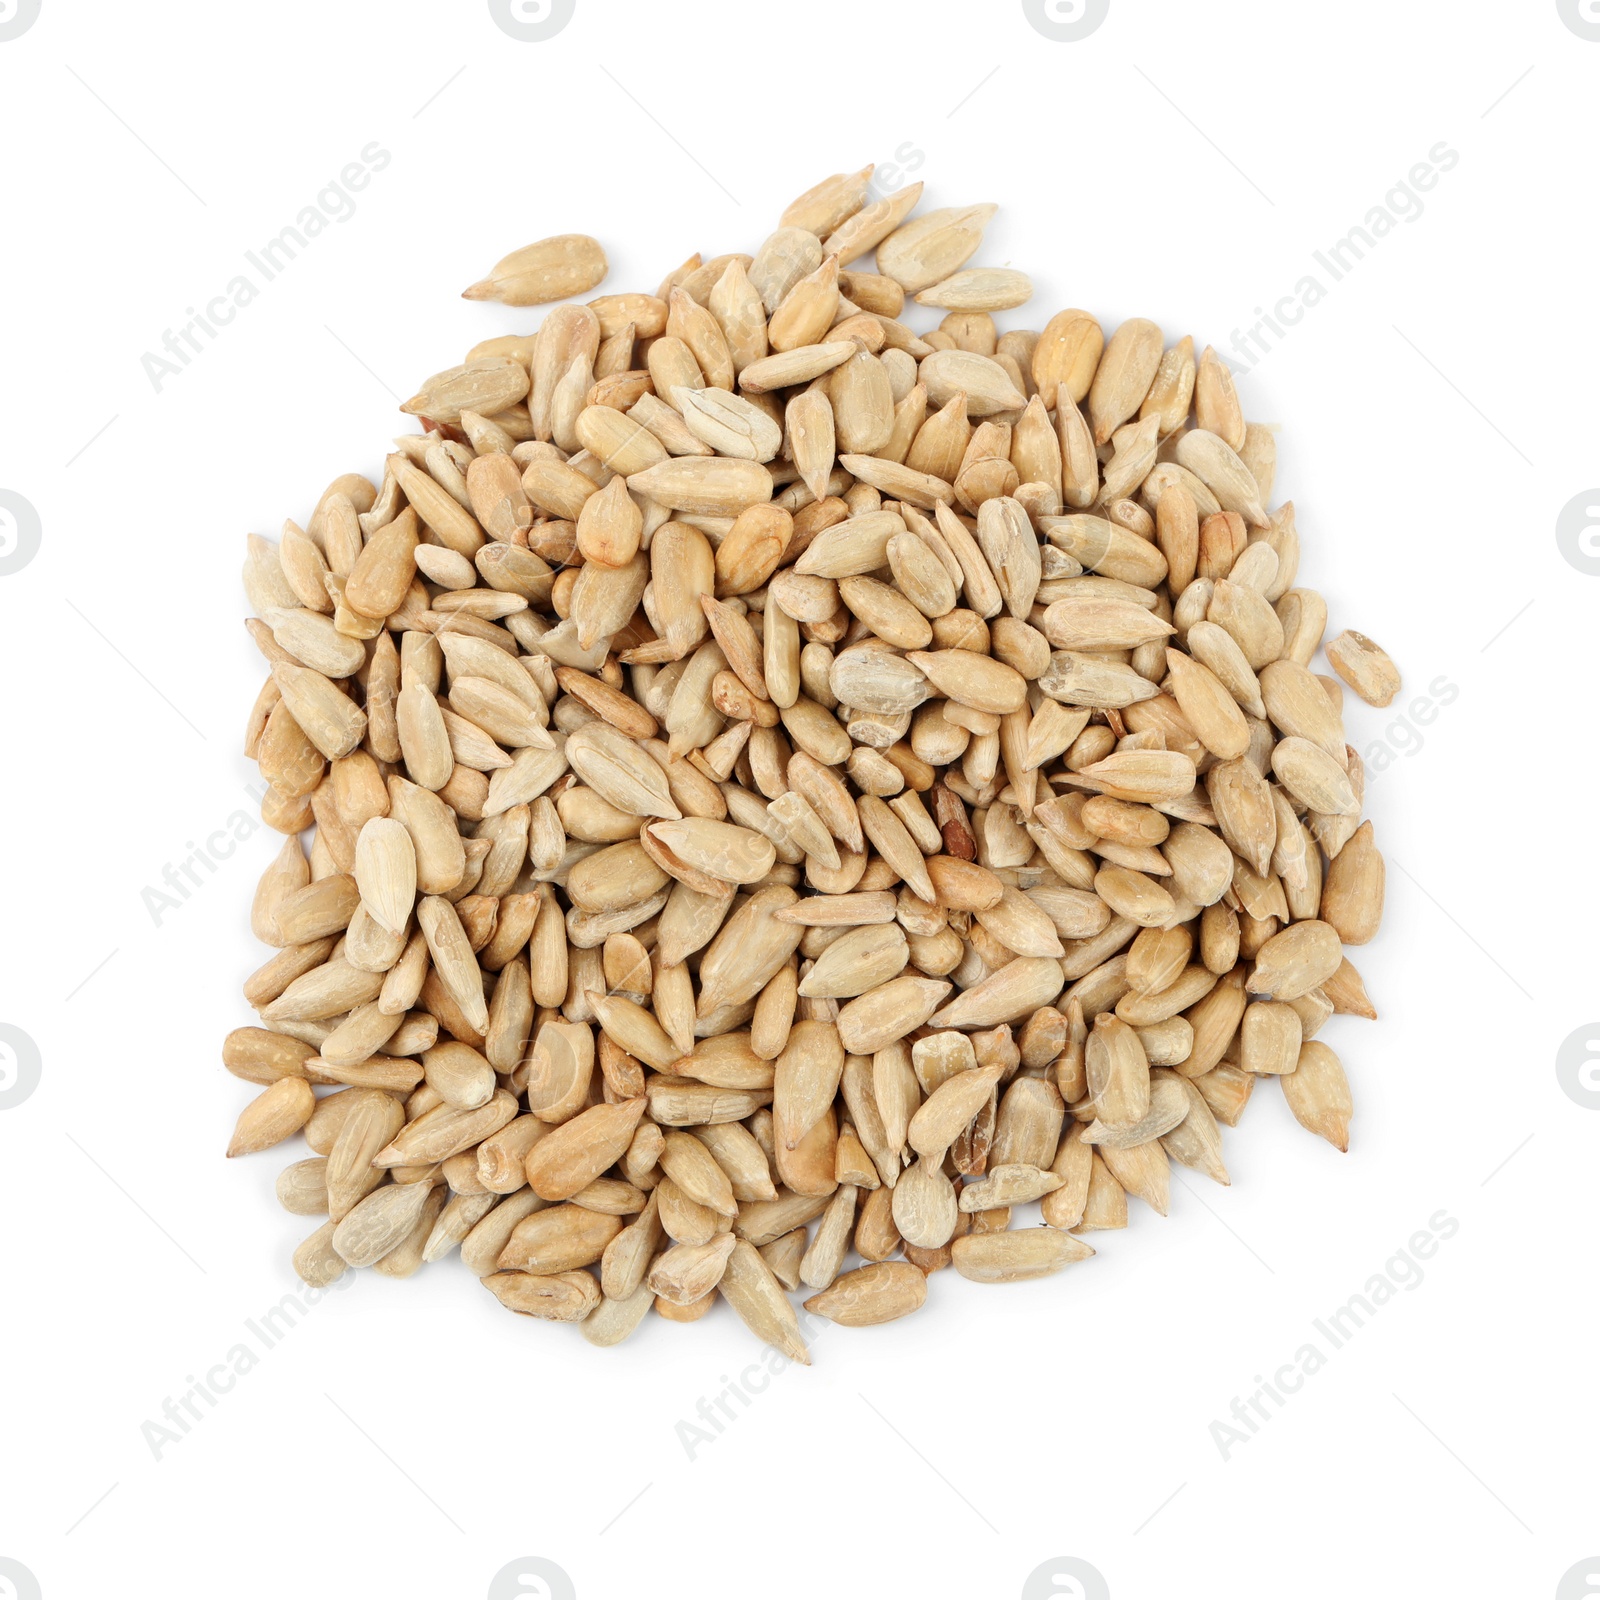 Photo of Pile of peeled sunflower seeds isolated on white, top view